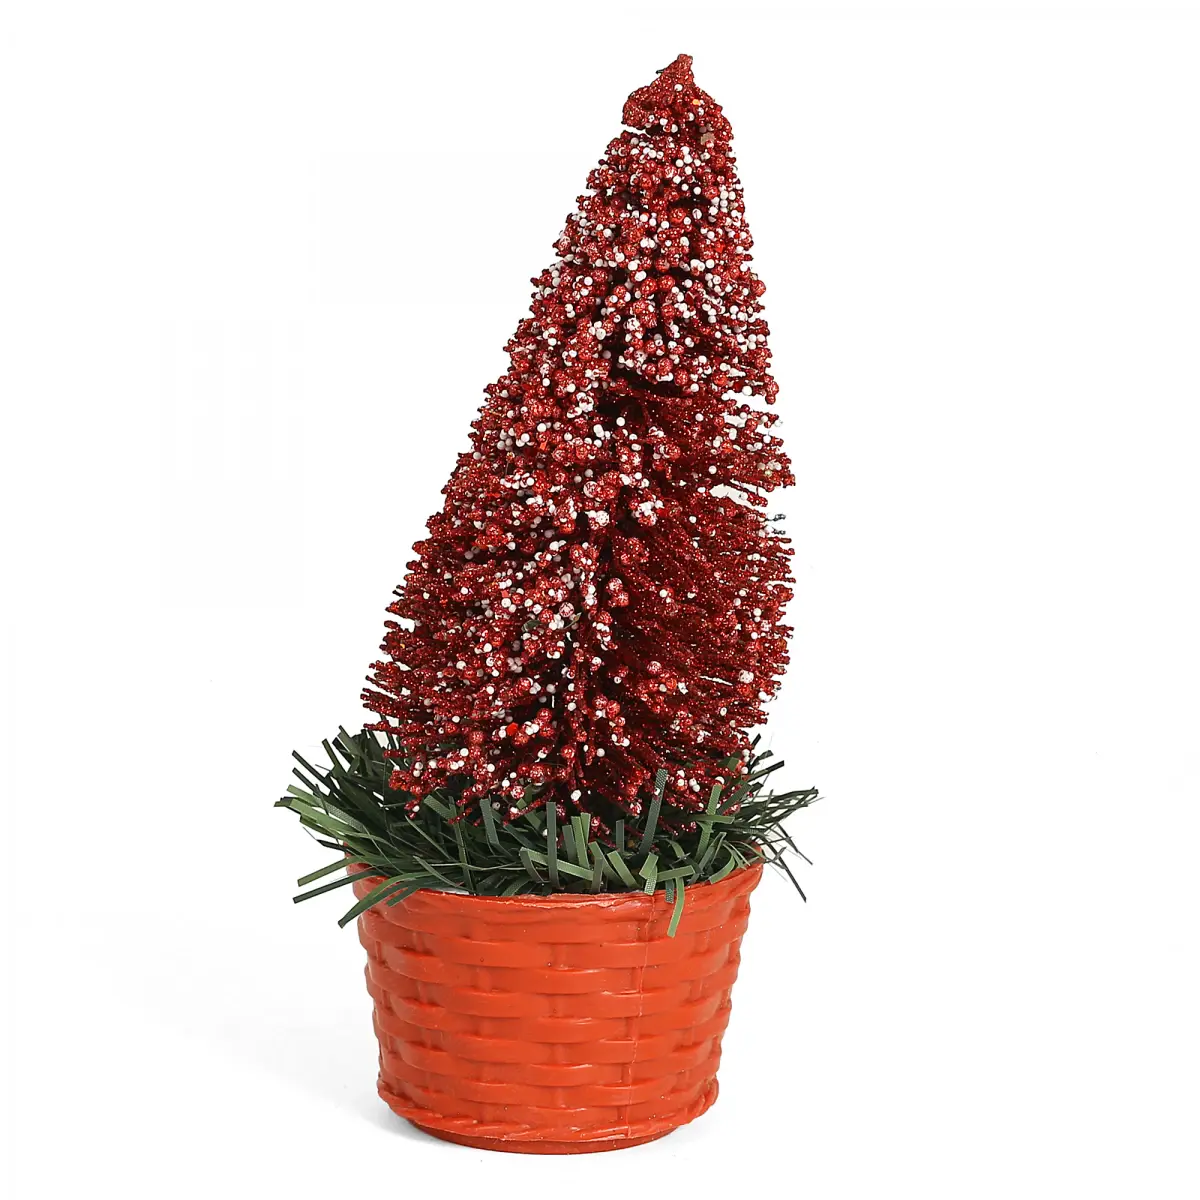 Boing Christmas Tree Decorations, 18cm, Red